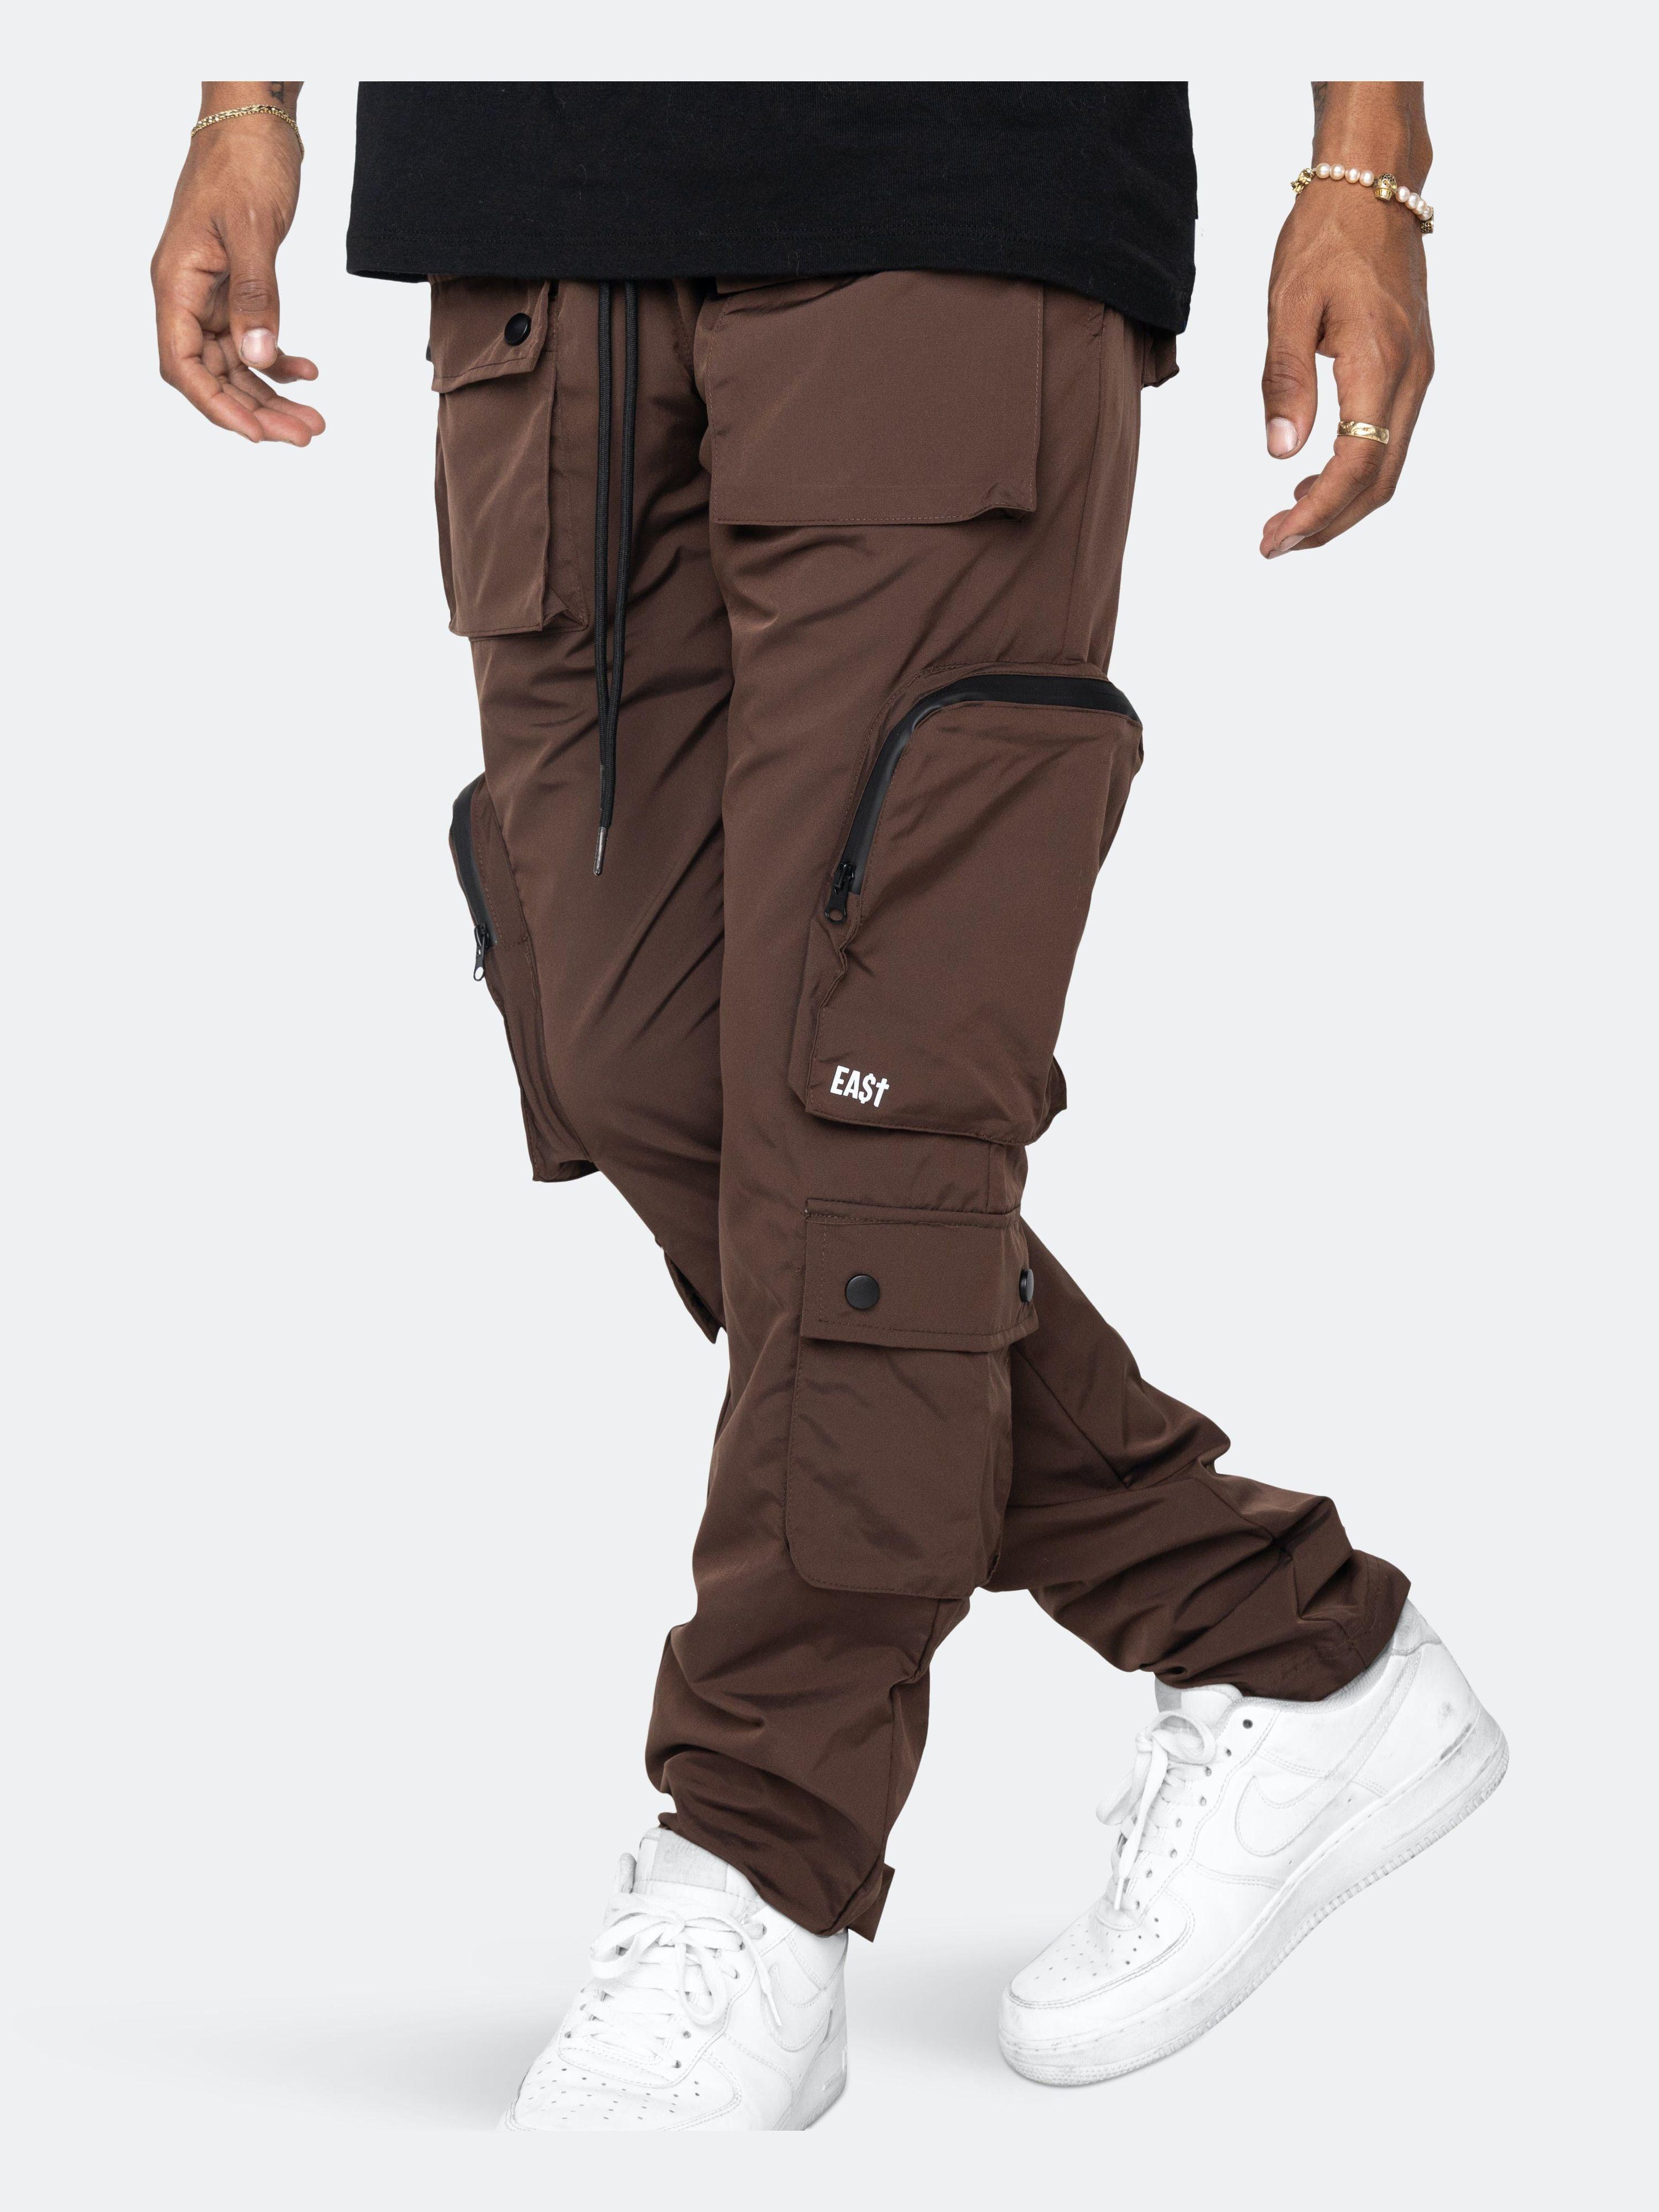 Eptm Dave East Dope Boy Cargos in Brown for Men